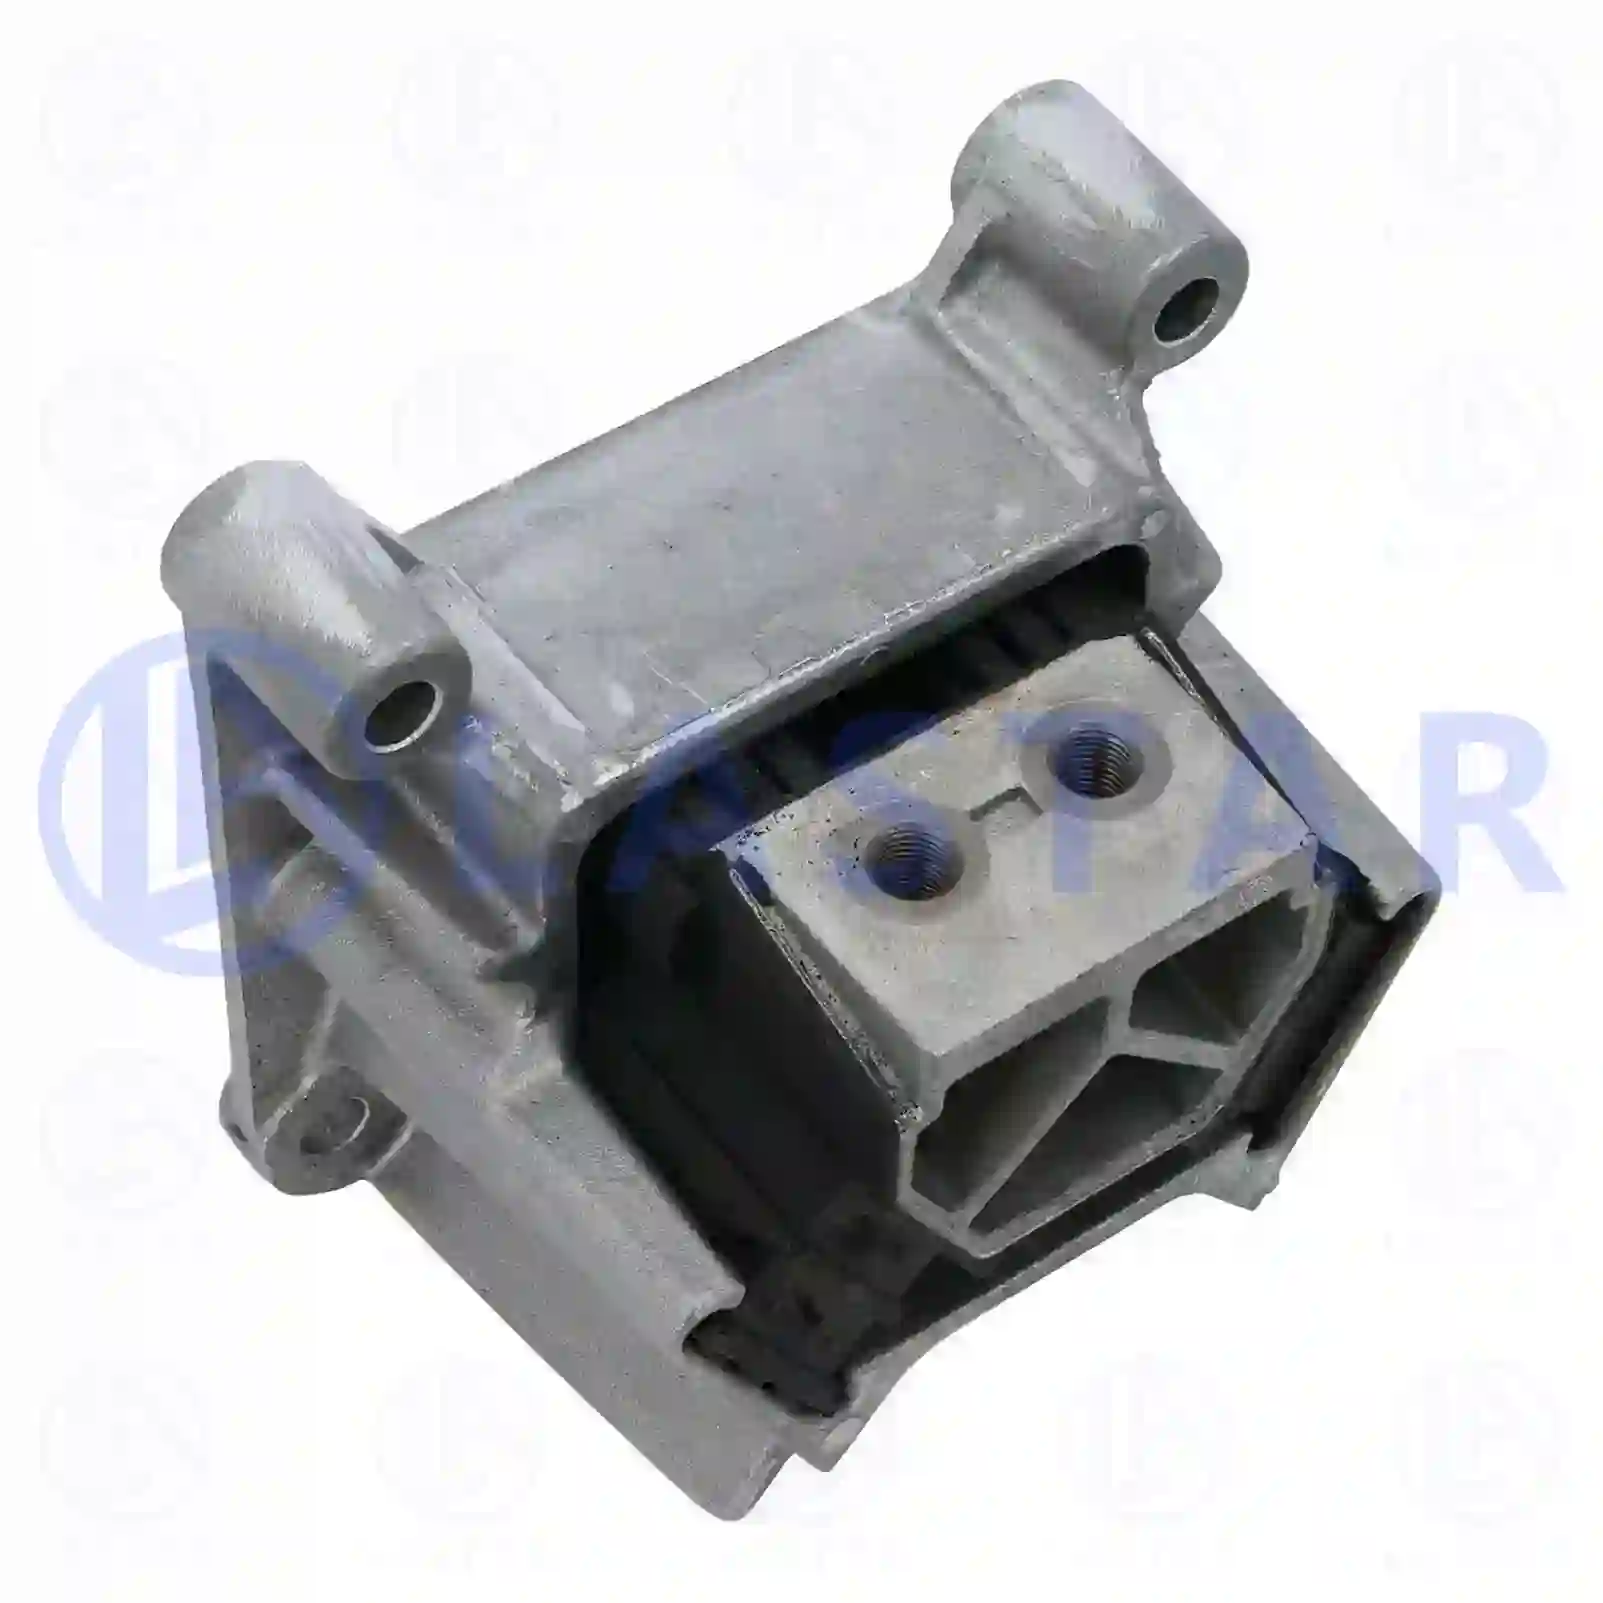 Engine mounting, 77704390, 81962100582, 81962100583, 81962100598, ||  77704390 Lastar Spare Part | Truck Spare Parts, Auotomotive Spare Parts Engine mounting, 77704390, 81962100582, 81962100583, 81962100598, ||  77704390 Lastar Spare Part | Truck Spare Parts, Auotomotive Spare Parts